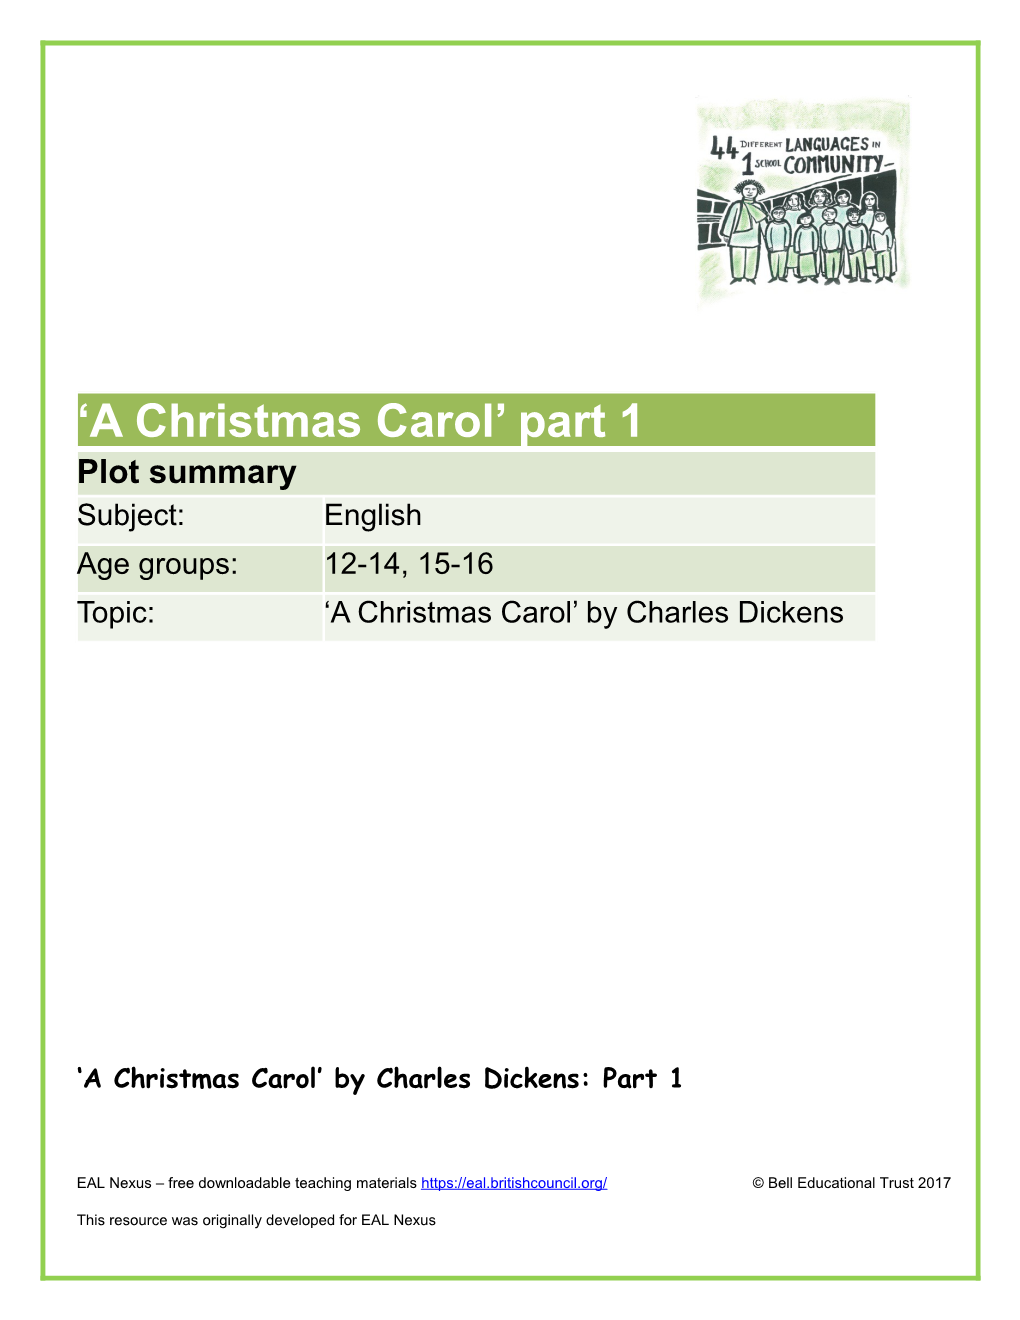 A Christmas Carol by Charles Dickens: Part 1